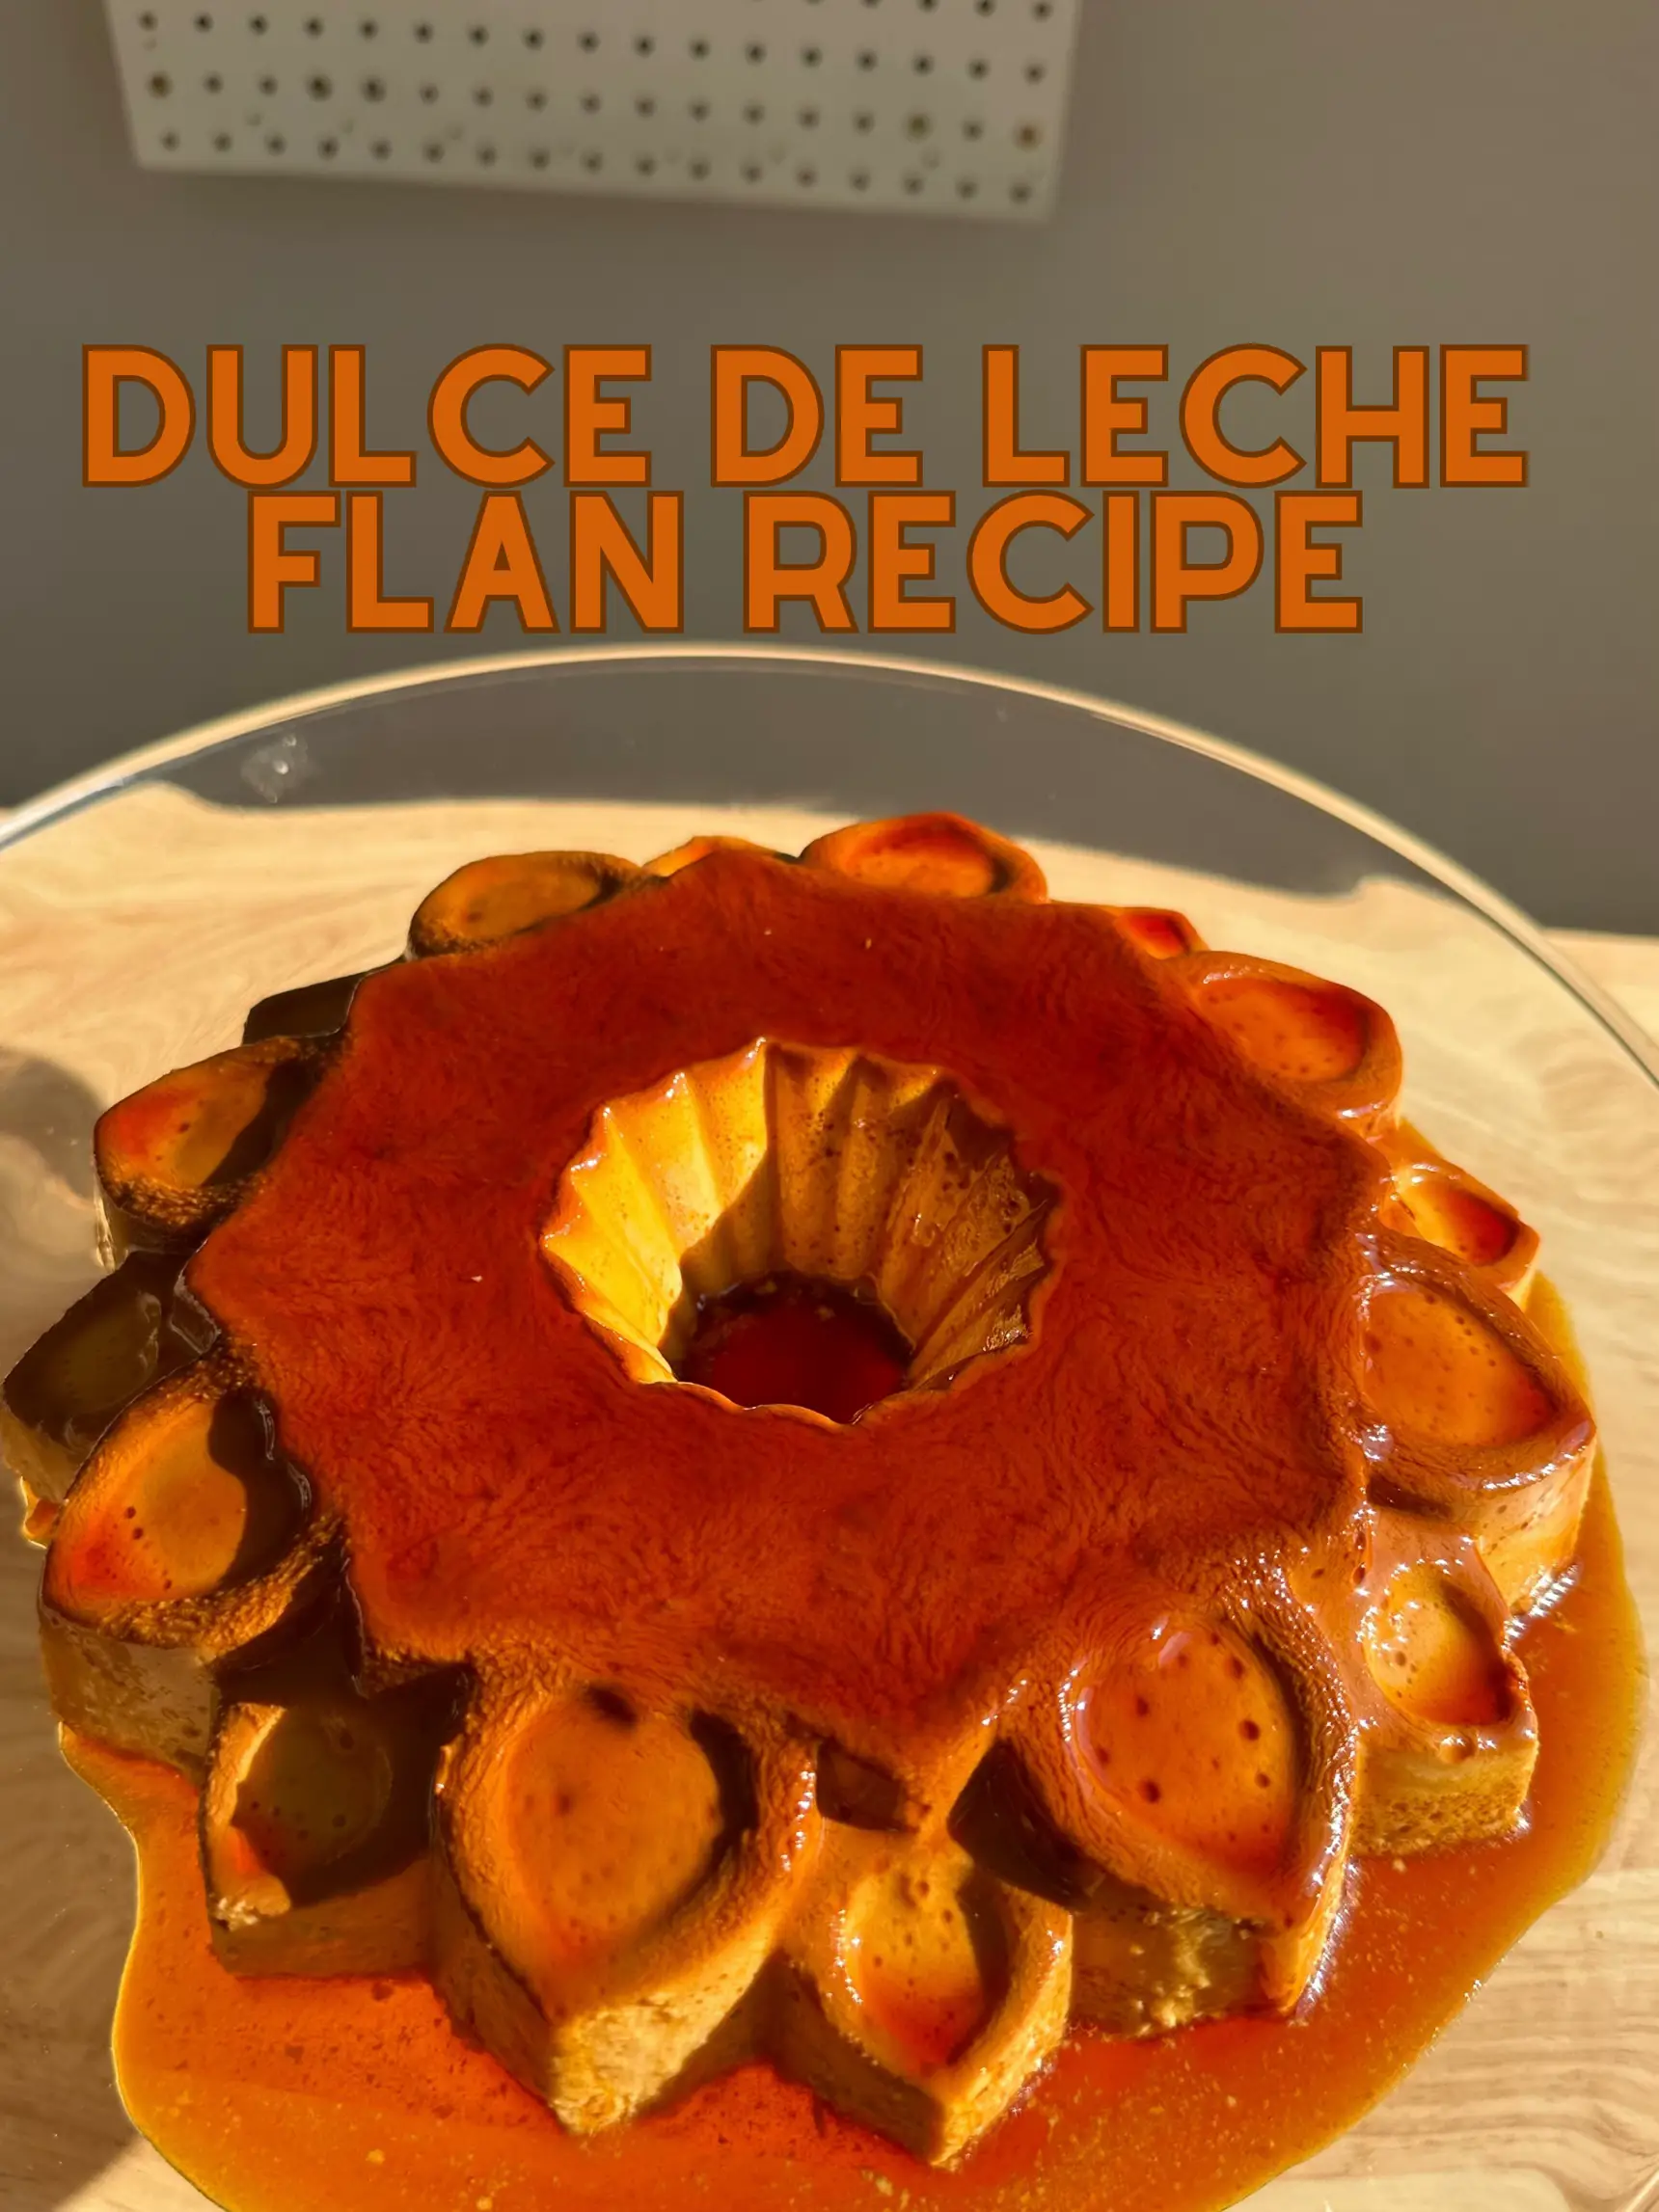 Spanish Flan Recipe - Also The Crumbs Please